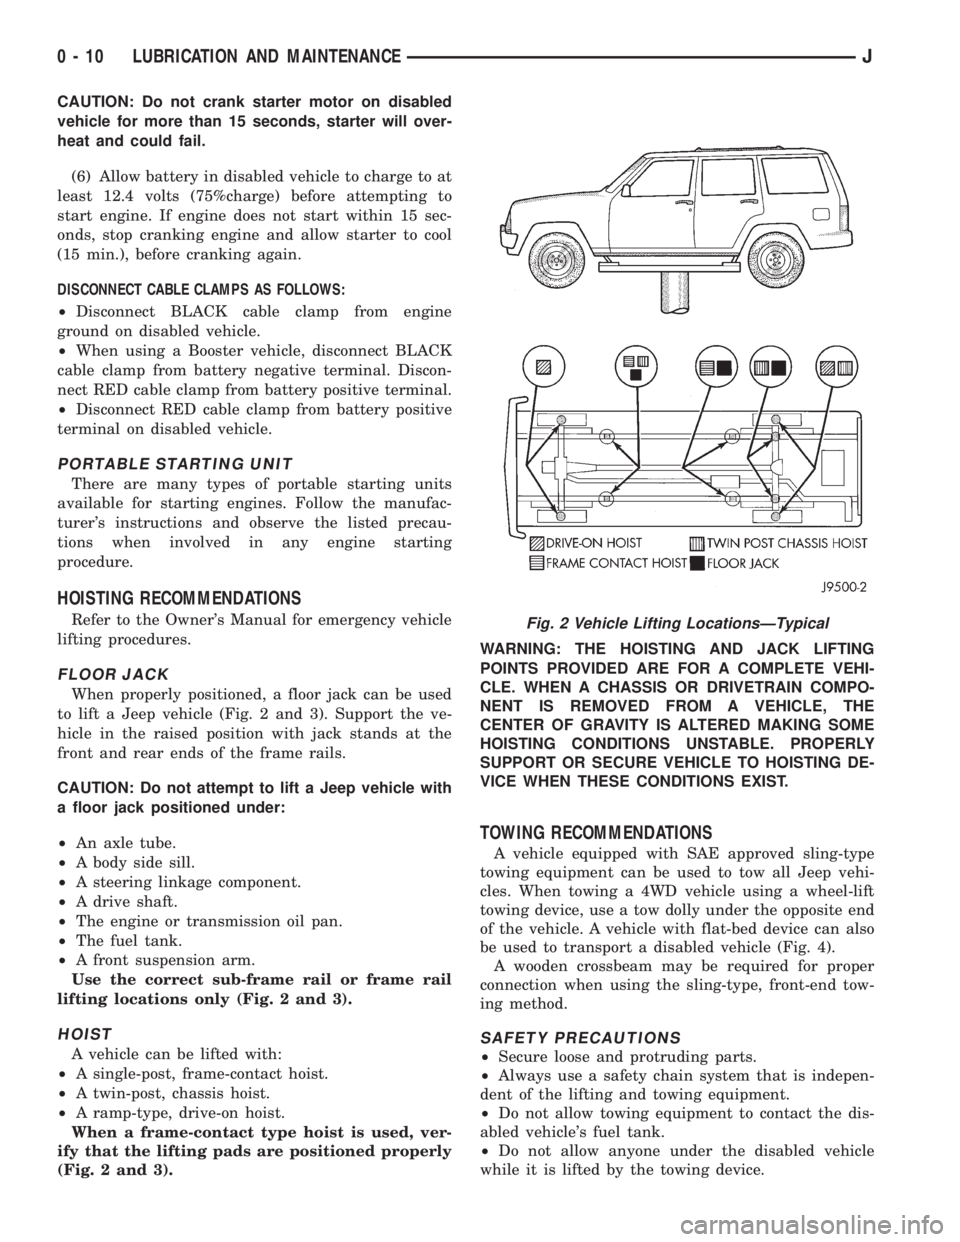 JEEP XJ 1995  Service And Repair Manual CAUTION: Do not crank starter motor on disabled
vehicle for more than 15 seconds, starter will over-
heat and could fail.
(6) Allow battery in disabled vehicle to charge to at
least 12.4 volts (75%cha